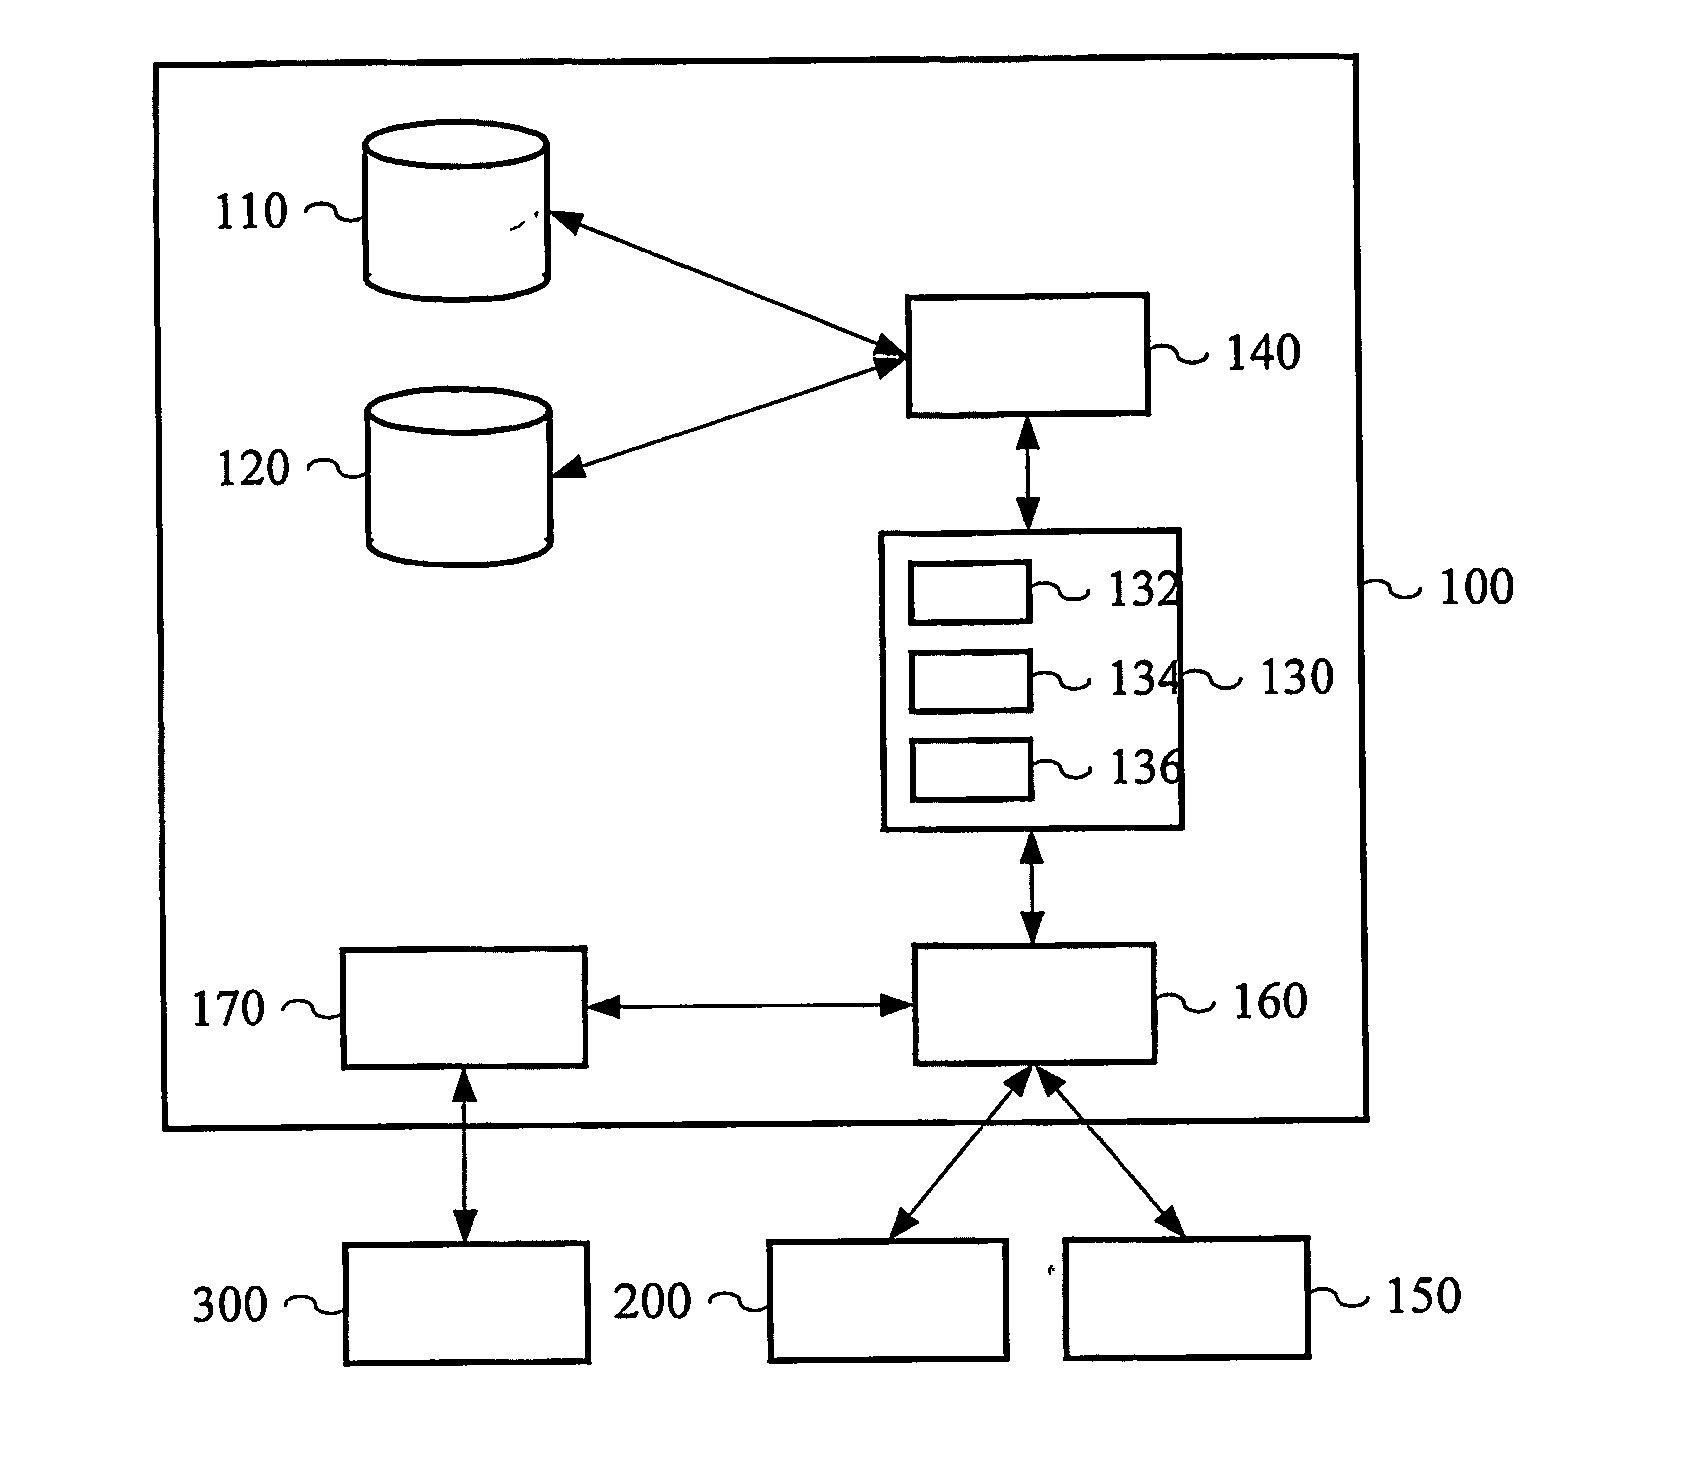 Apparatus, method and computer program product for modelling causality in a flow system